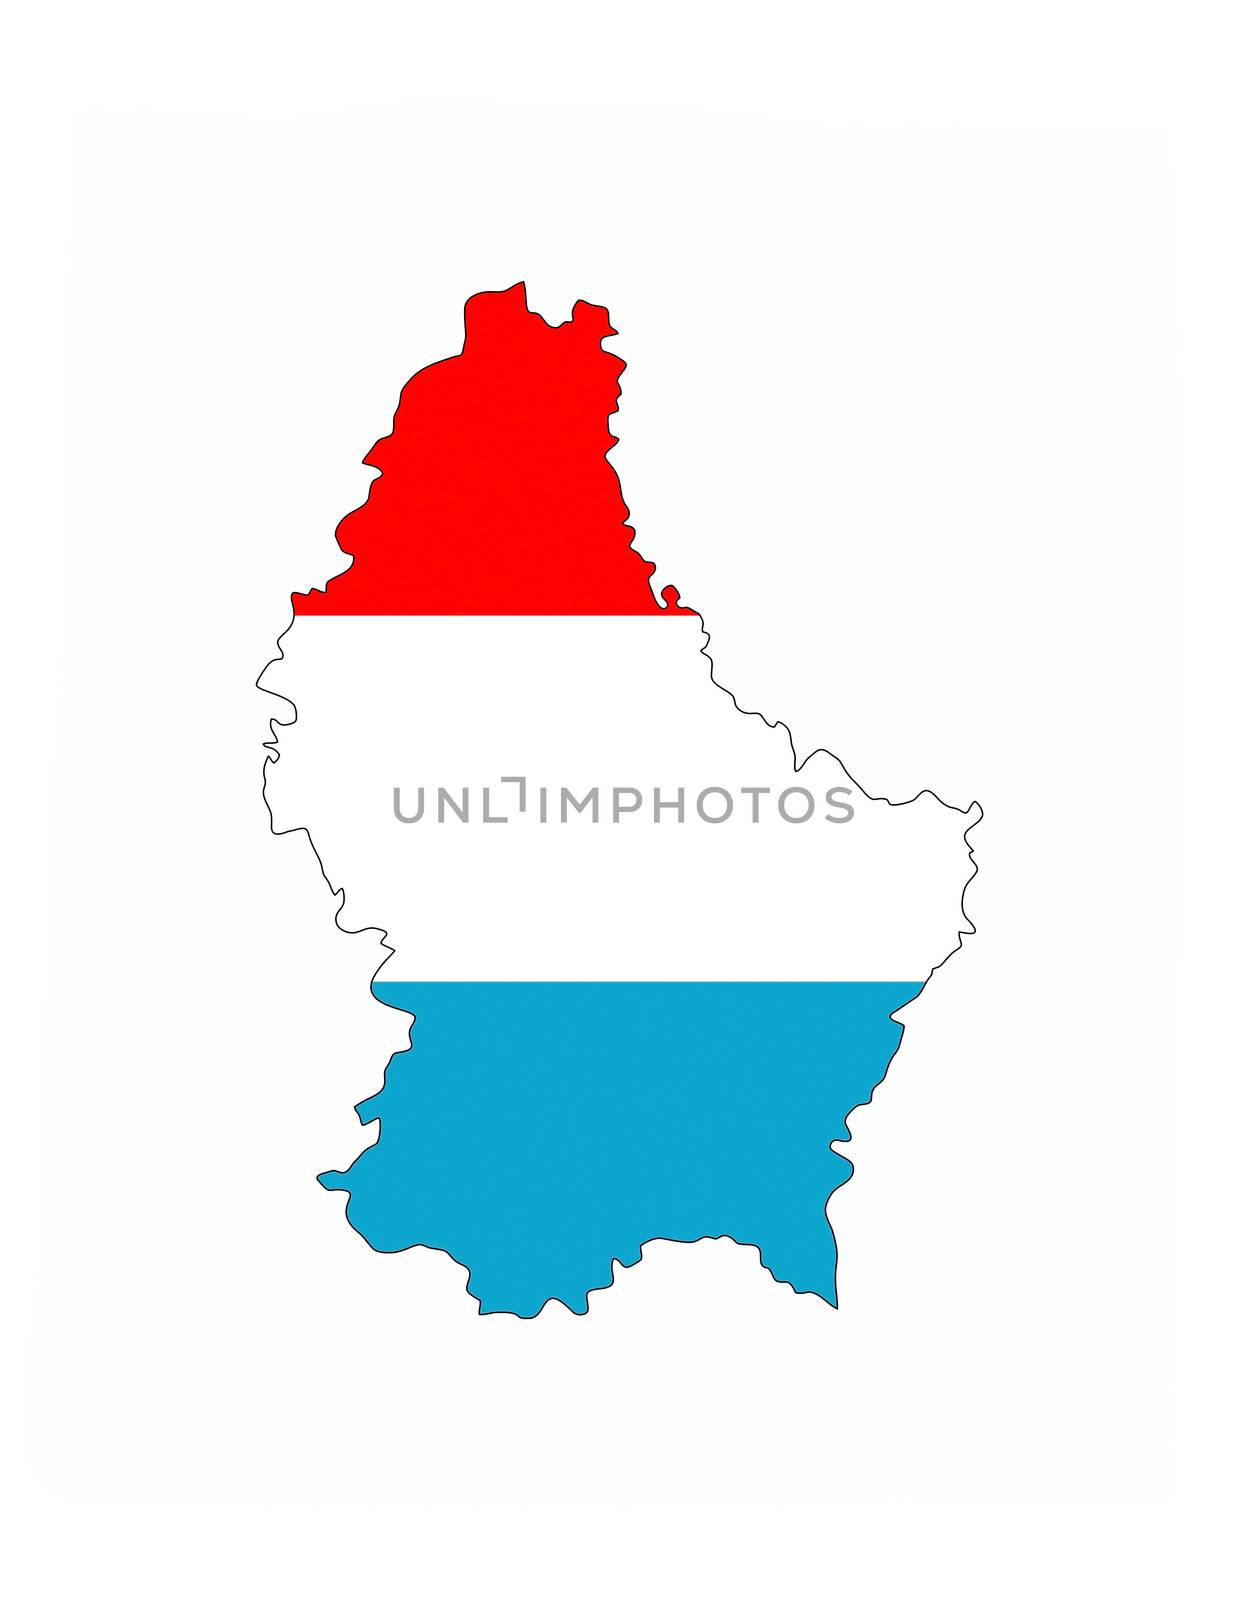 luxembourg country flag map shape national symbol